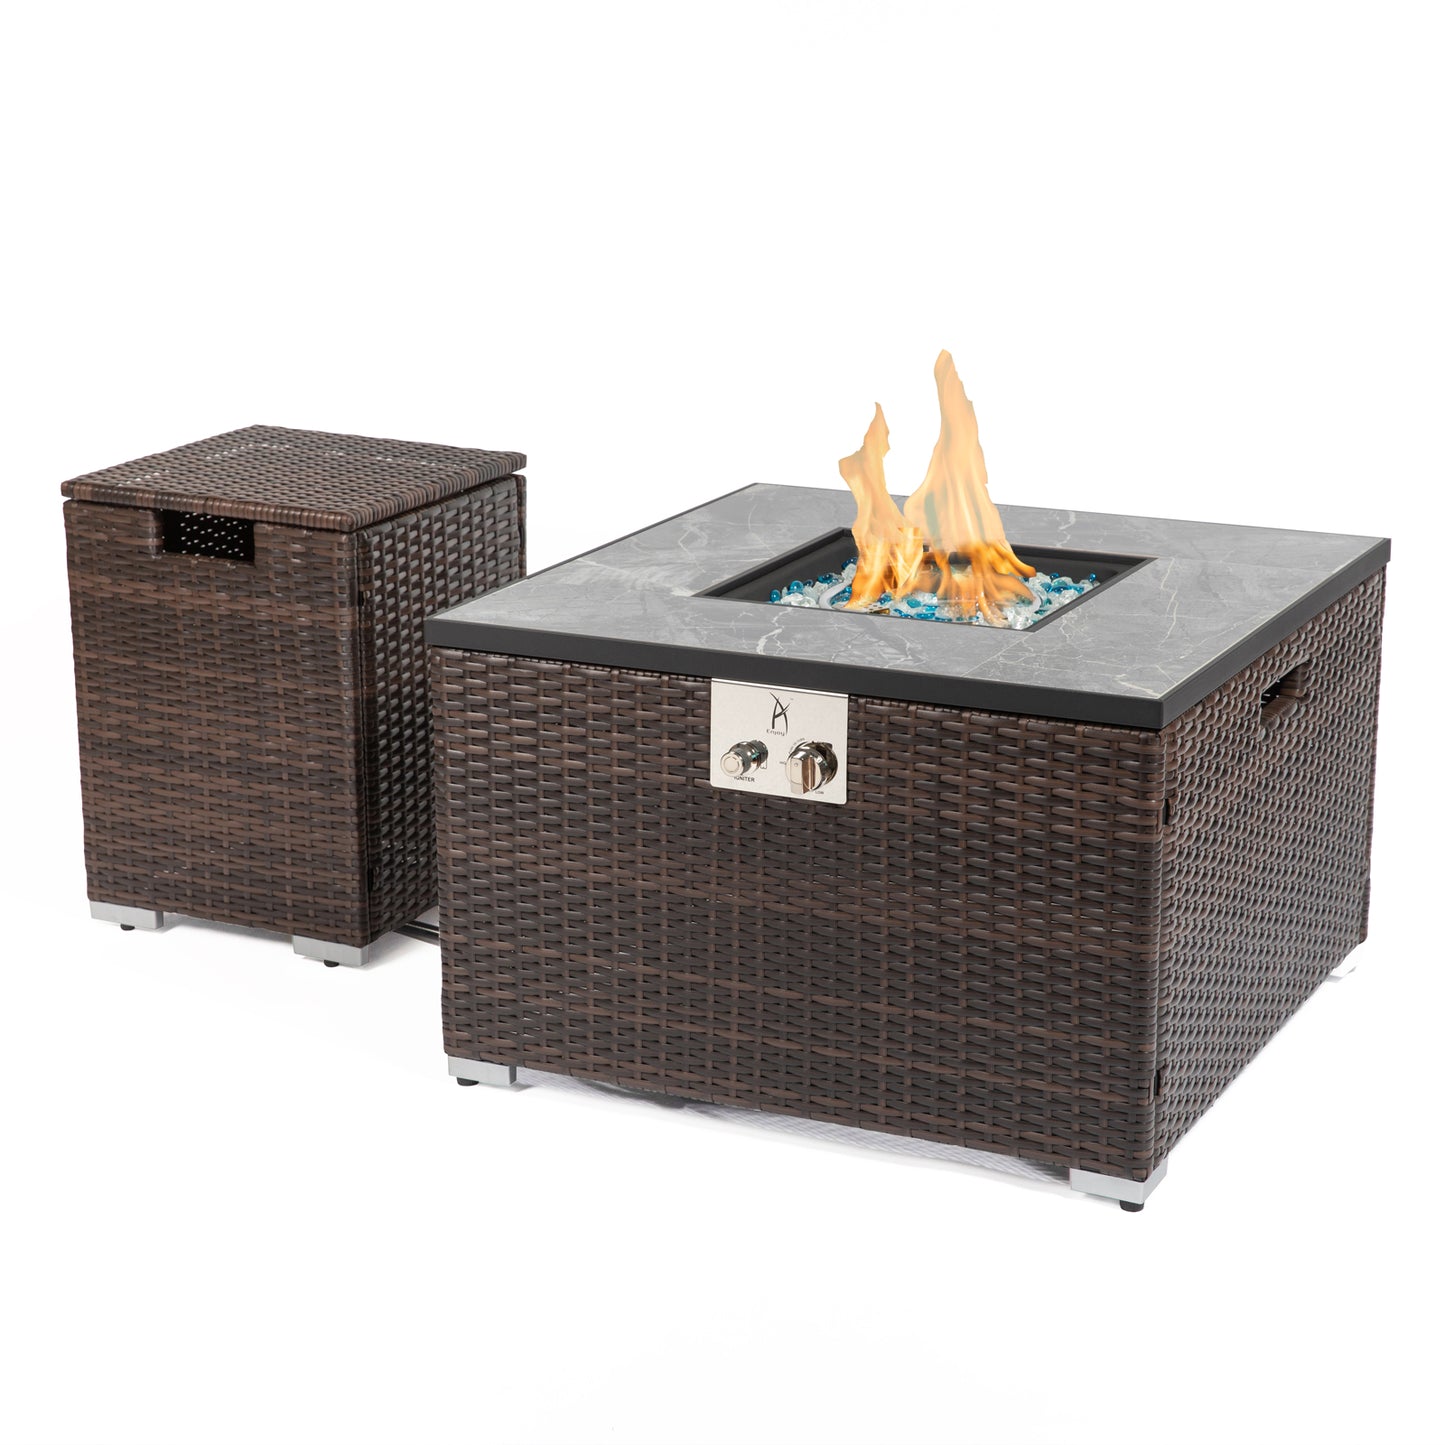 32'' Square Wicker Gas Outdoor Fire Pit Table with Rattan Tank Cover